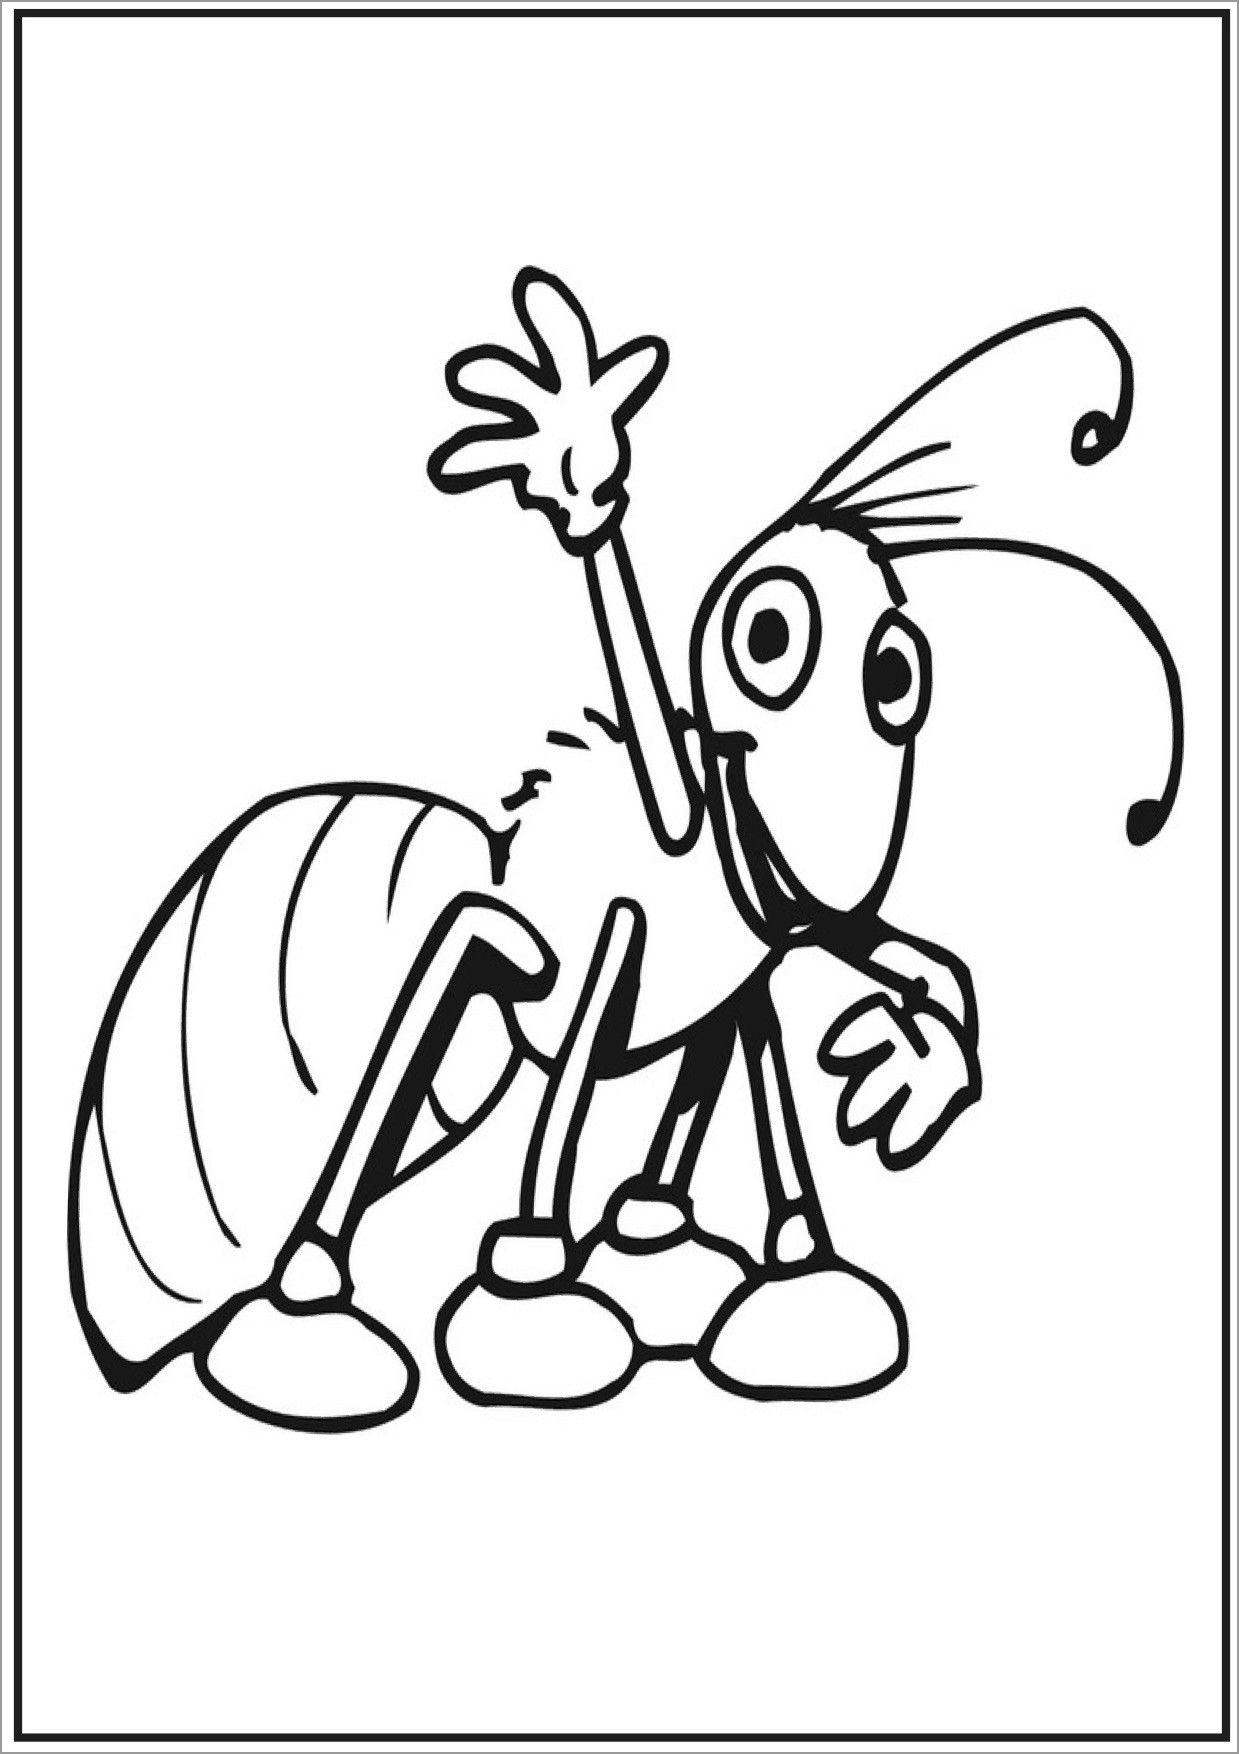 Marching Ant Coloring Page